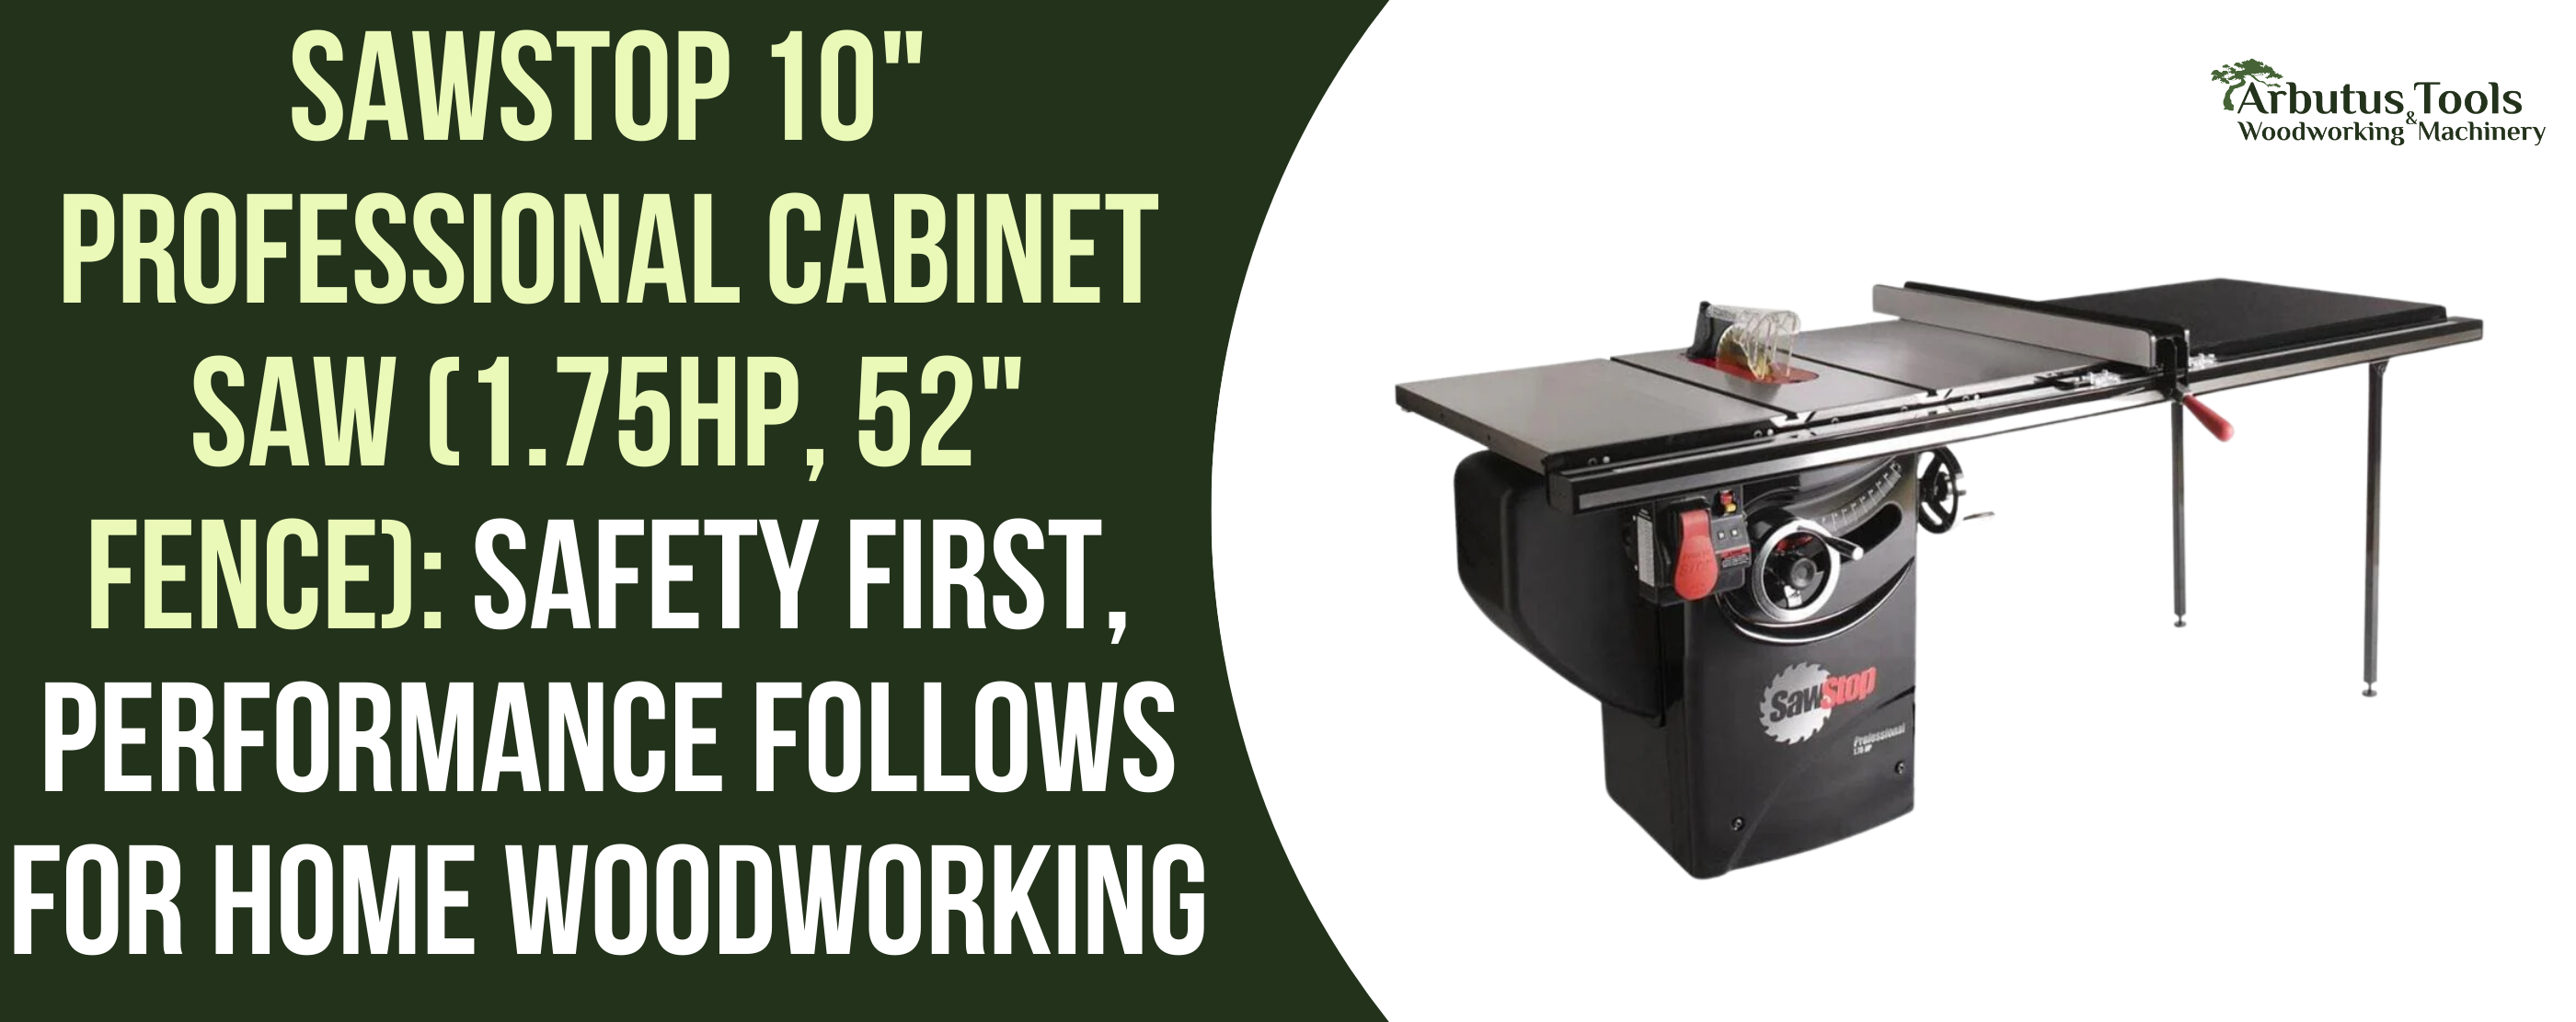 SawStop 10" Professional Cabinet Saw (1.75HP, 52" Fence): Safety First, Performance Follows for Home Woodworking